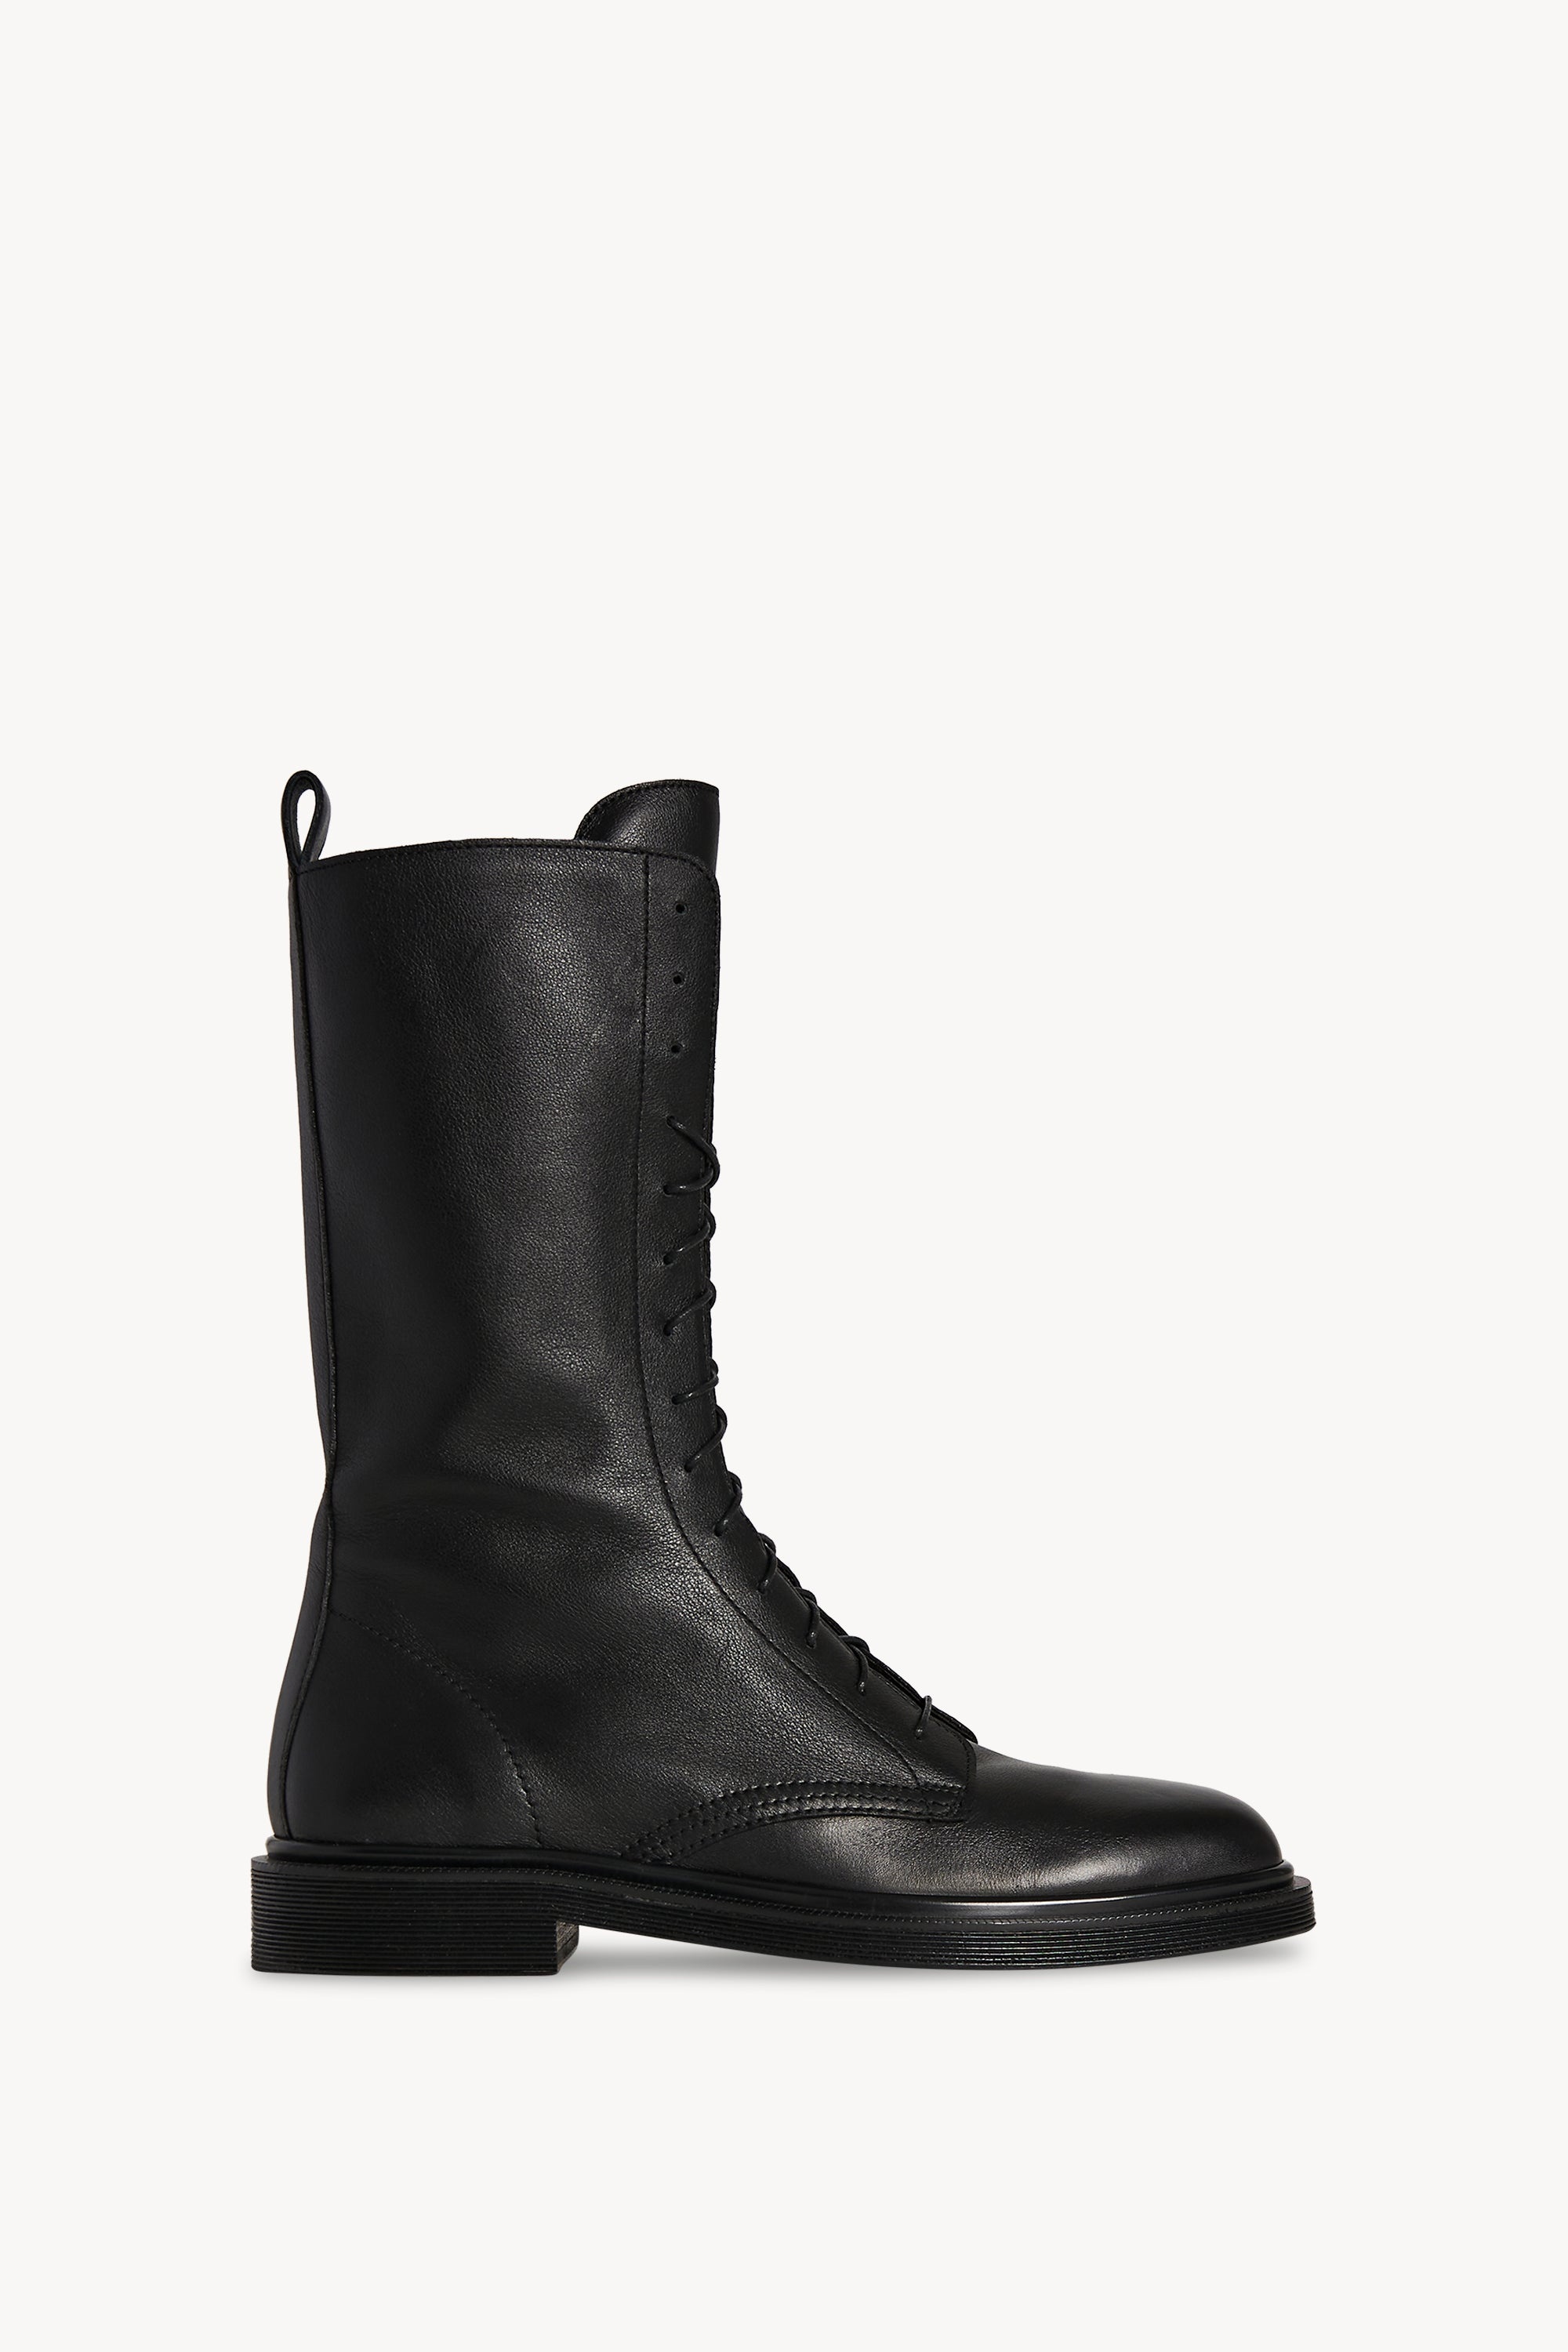 Ranger Lace Up Boot in Leather - 1